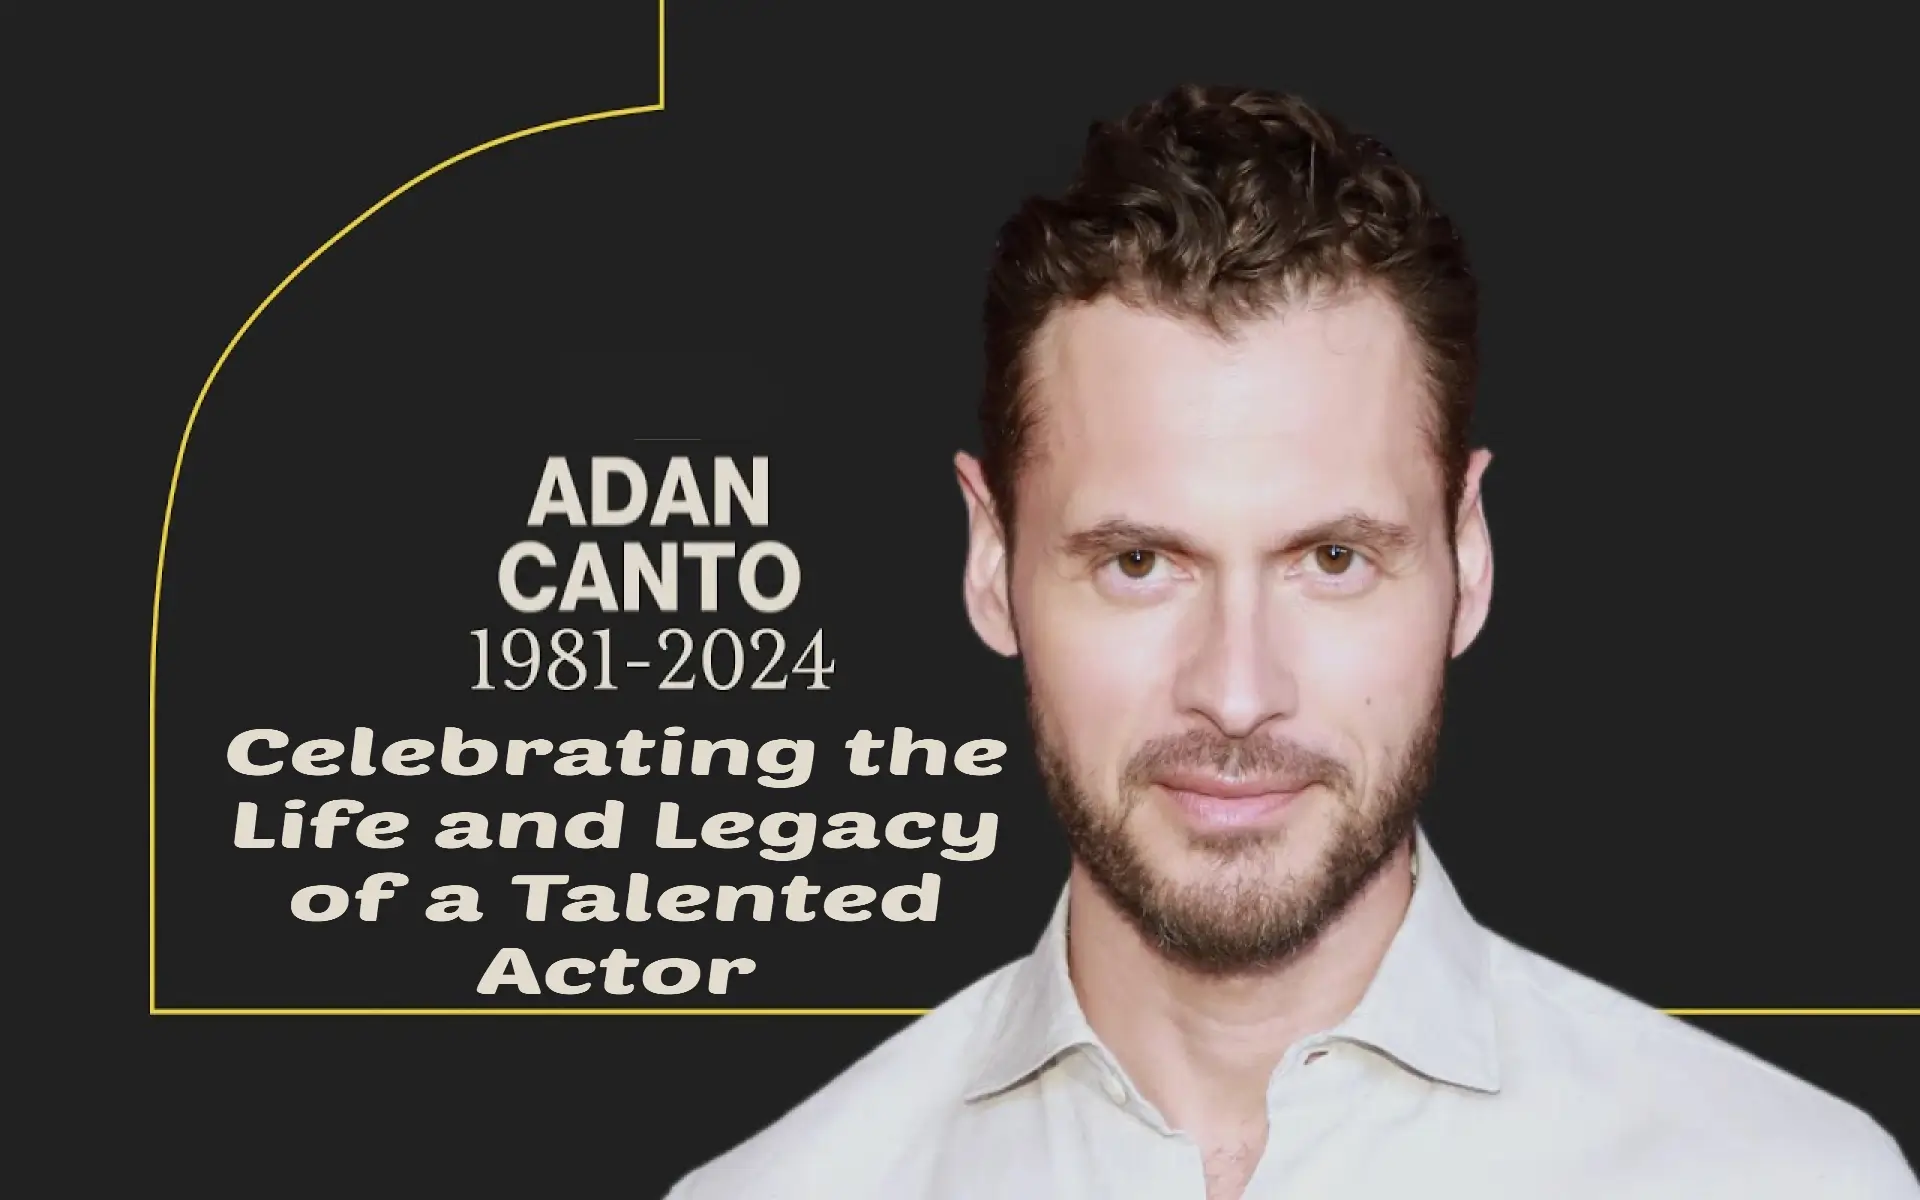 Adan Canto: Celebrating the Life and Legacy of a Talented Actor